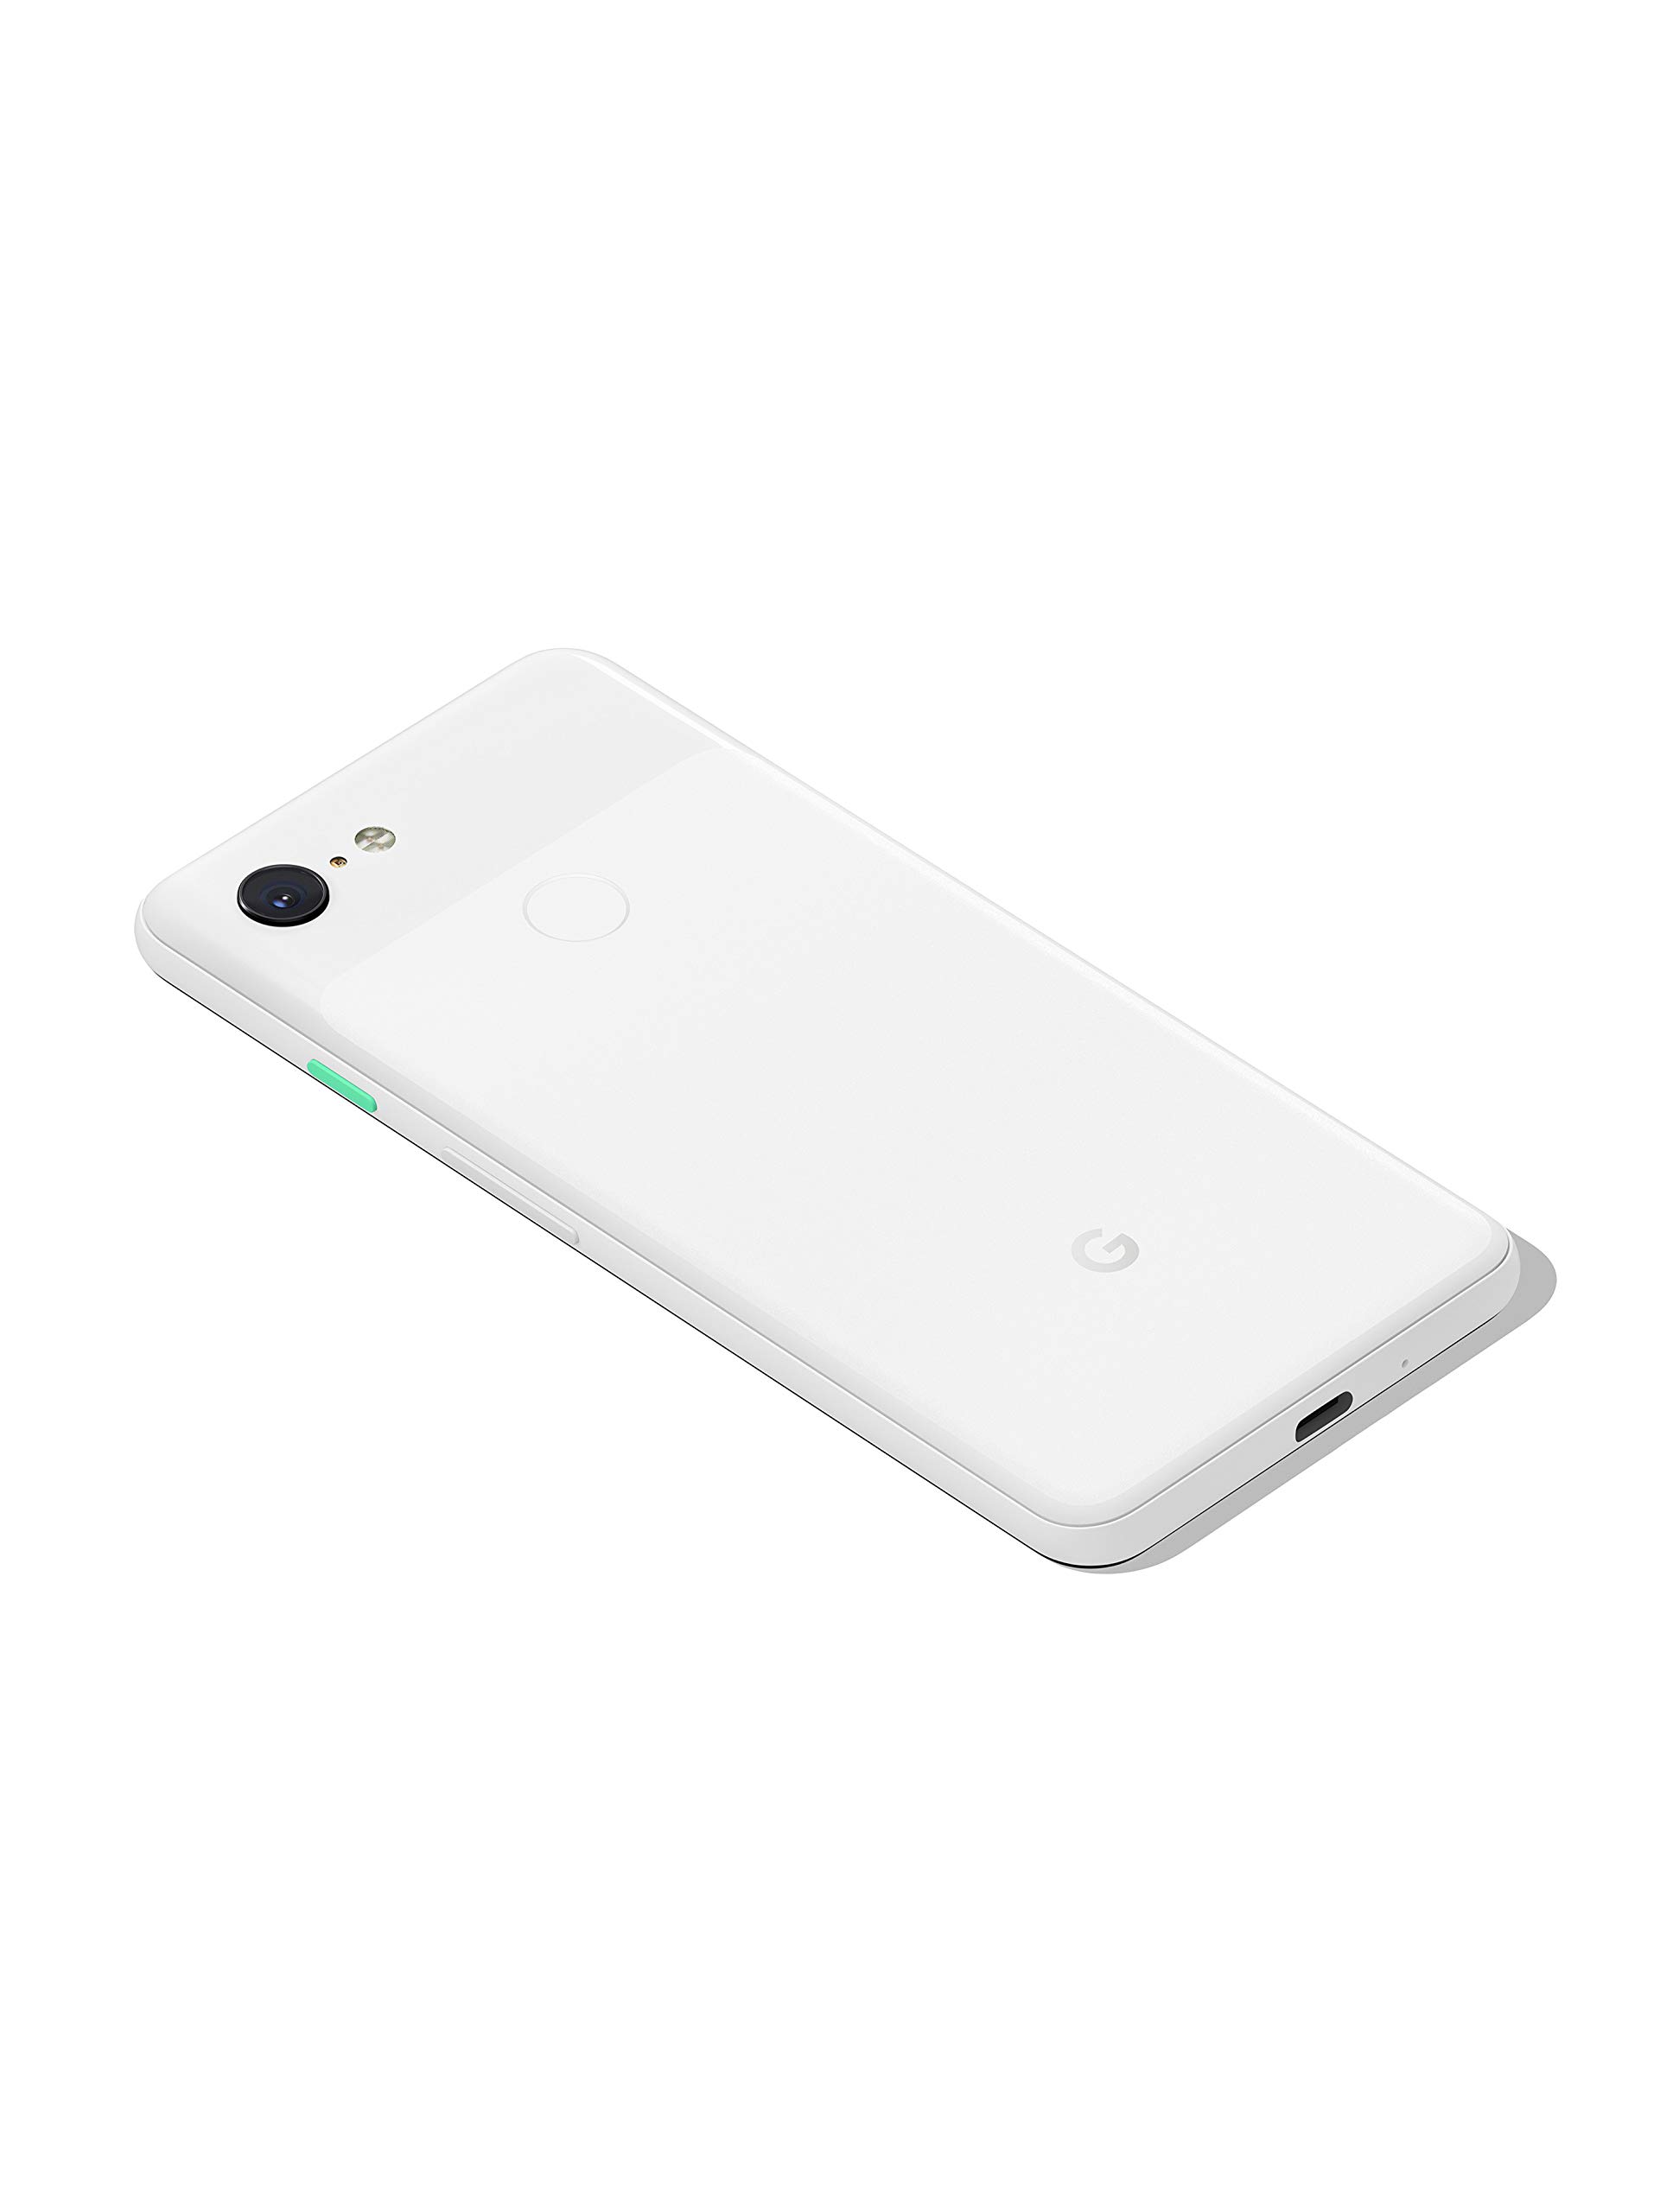 Google - Pixel 3 XL with 128GB Memory Cell Phone (Unlocked) - Clearly White